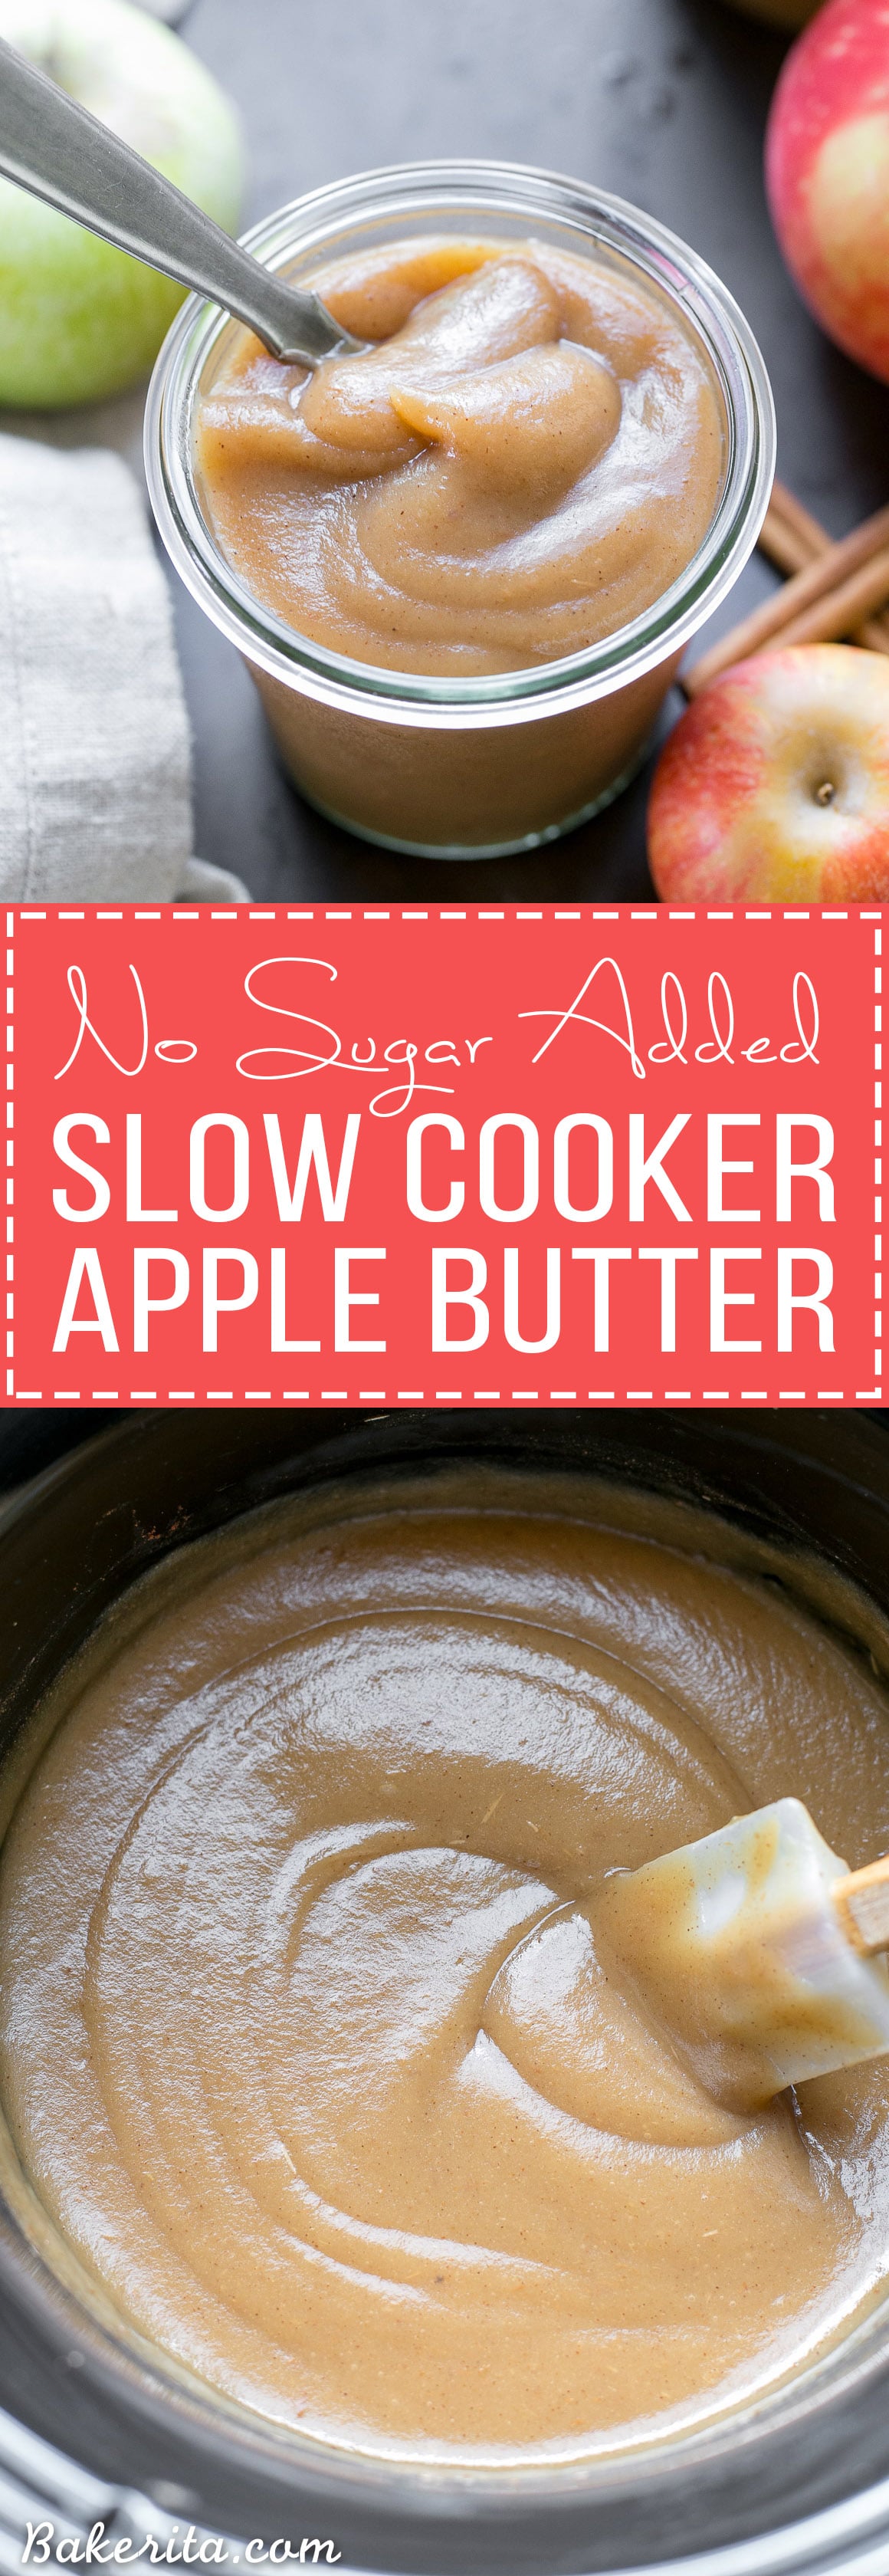 This Slow Cooker Apple Butter has no sugar added - just fresh apples, cinnamon, nutmeg, and lemon juice. This healthy homemade apple butter can be enjoyed on toast, stirred into oatmeal or yogurt, or eaten by the spoonful! It's Paleo-friendly and vegan.